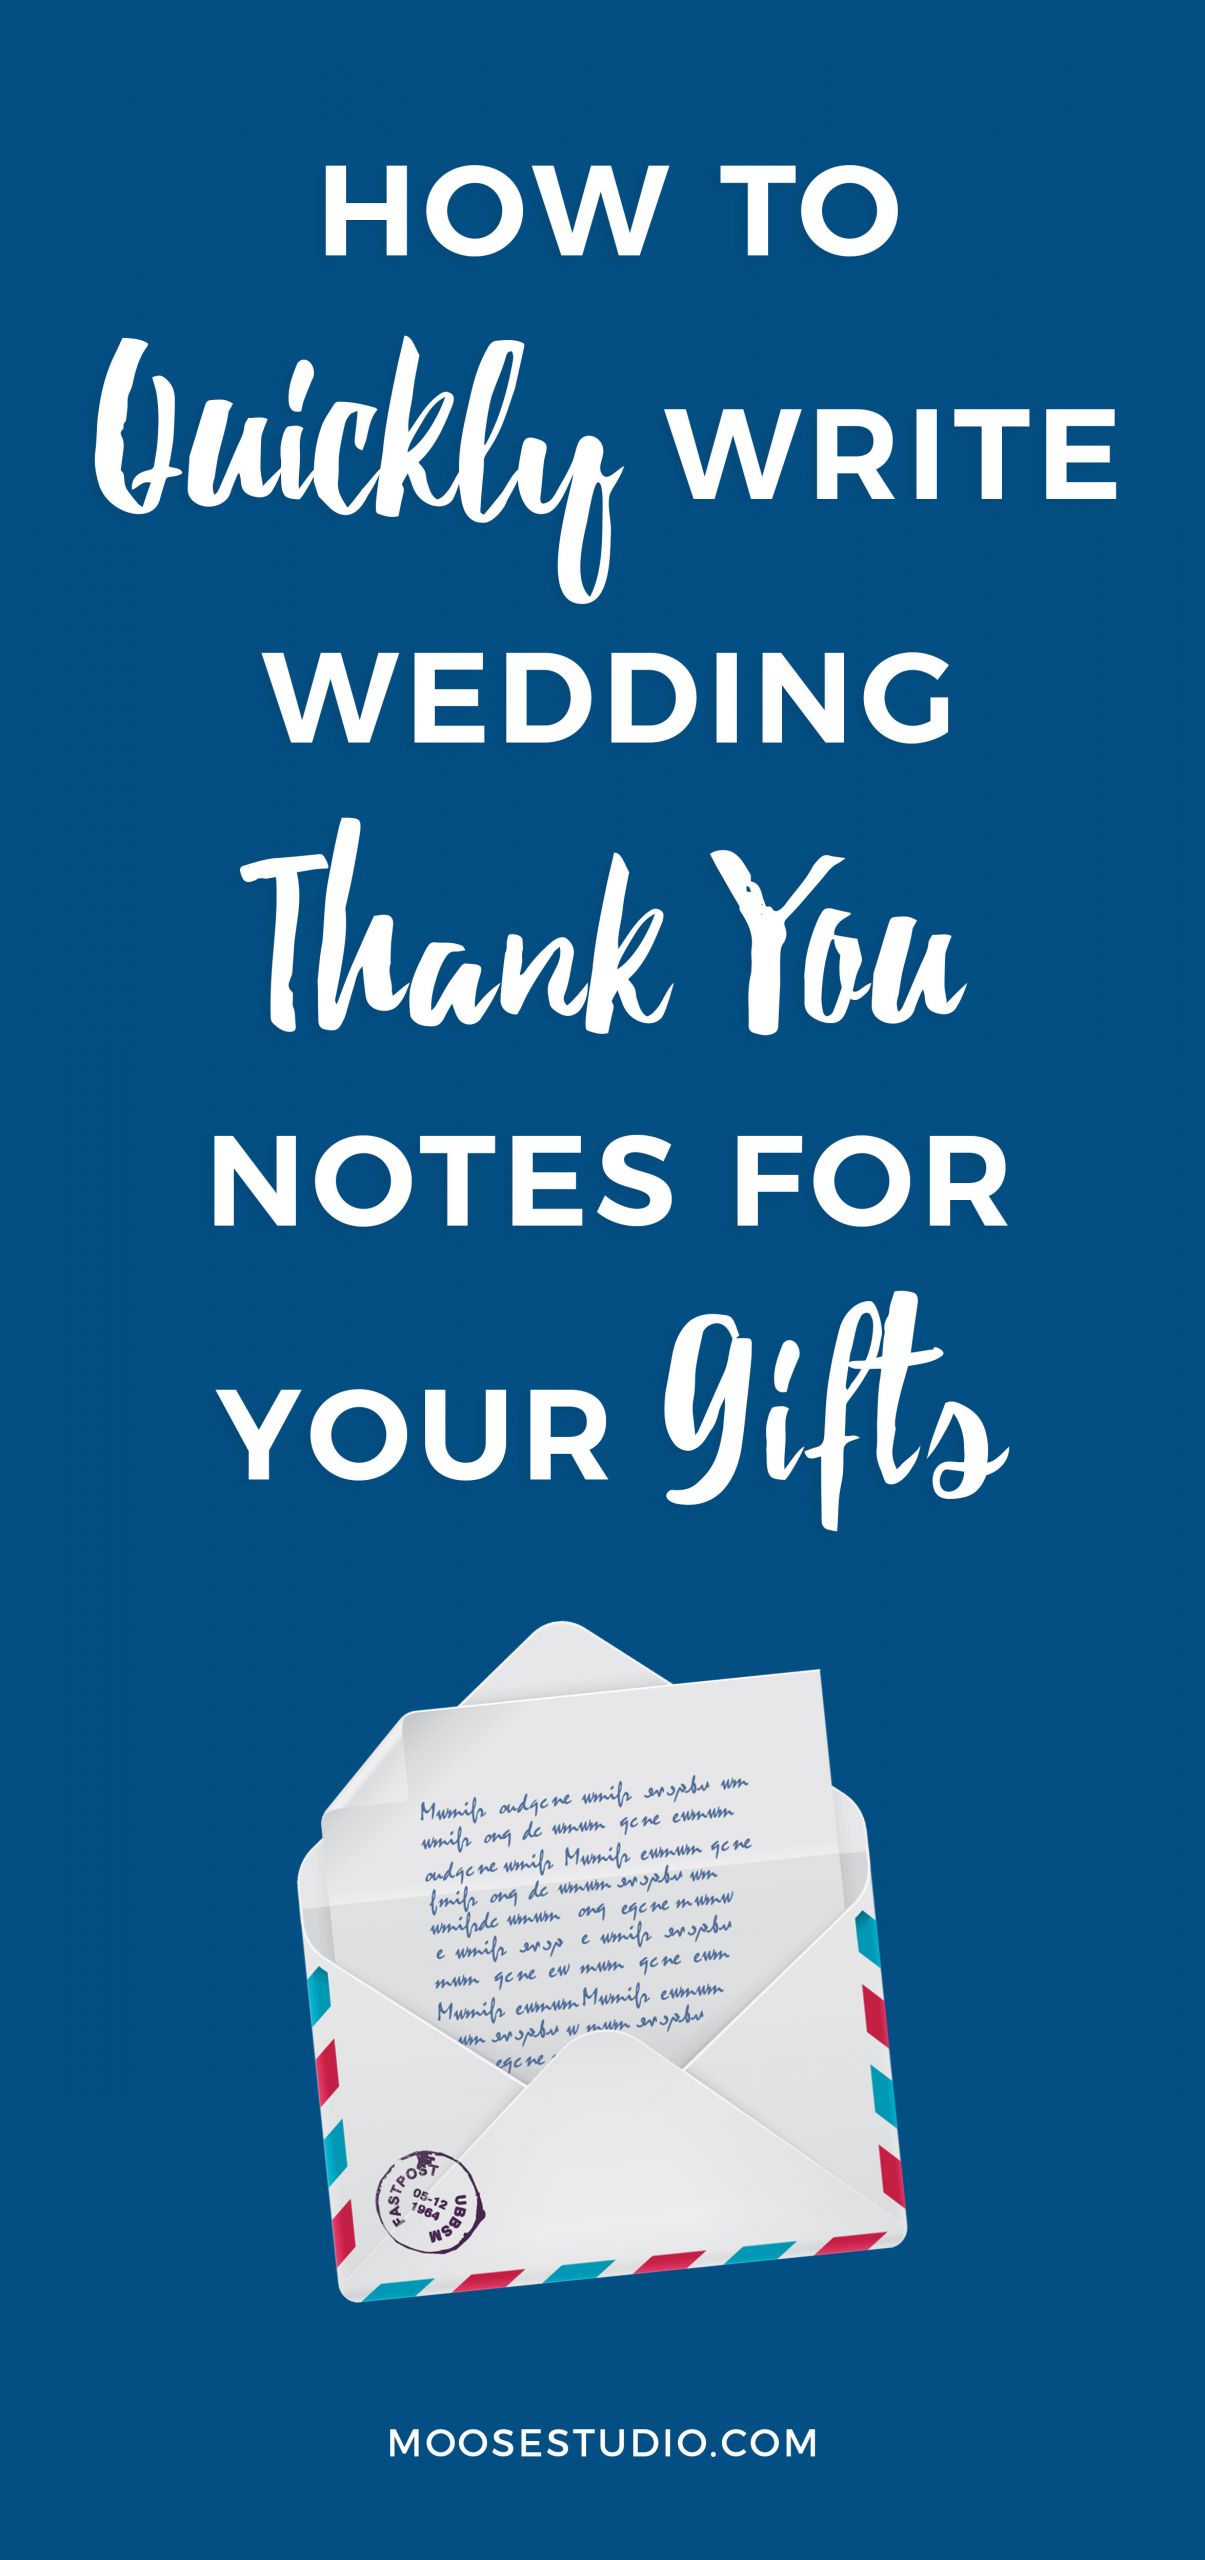 Gift Message For Wedding
 How To Quickly Conquer The Wording For Wedding Thank You Notes